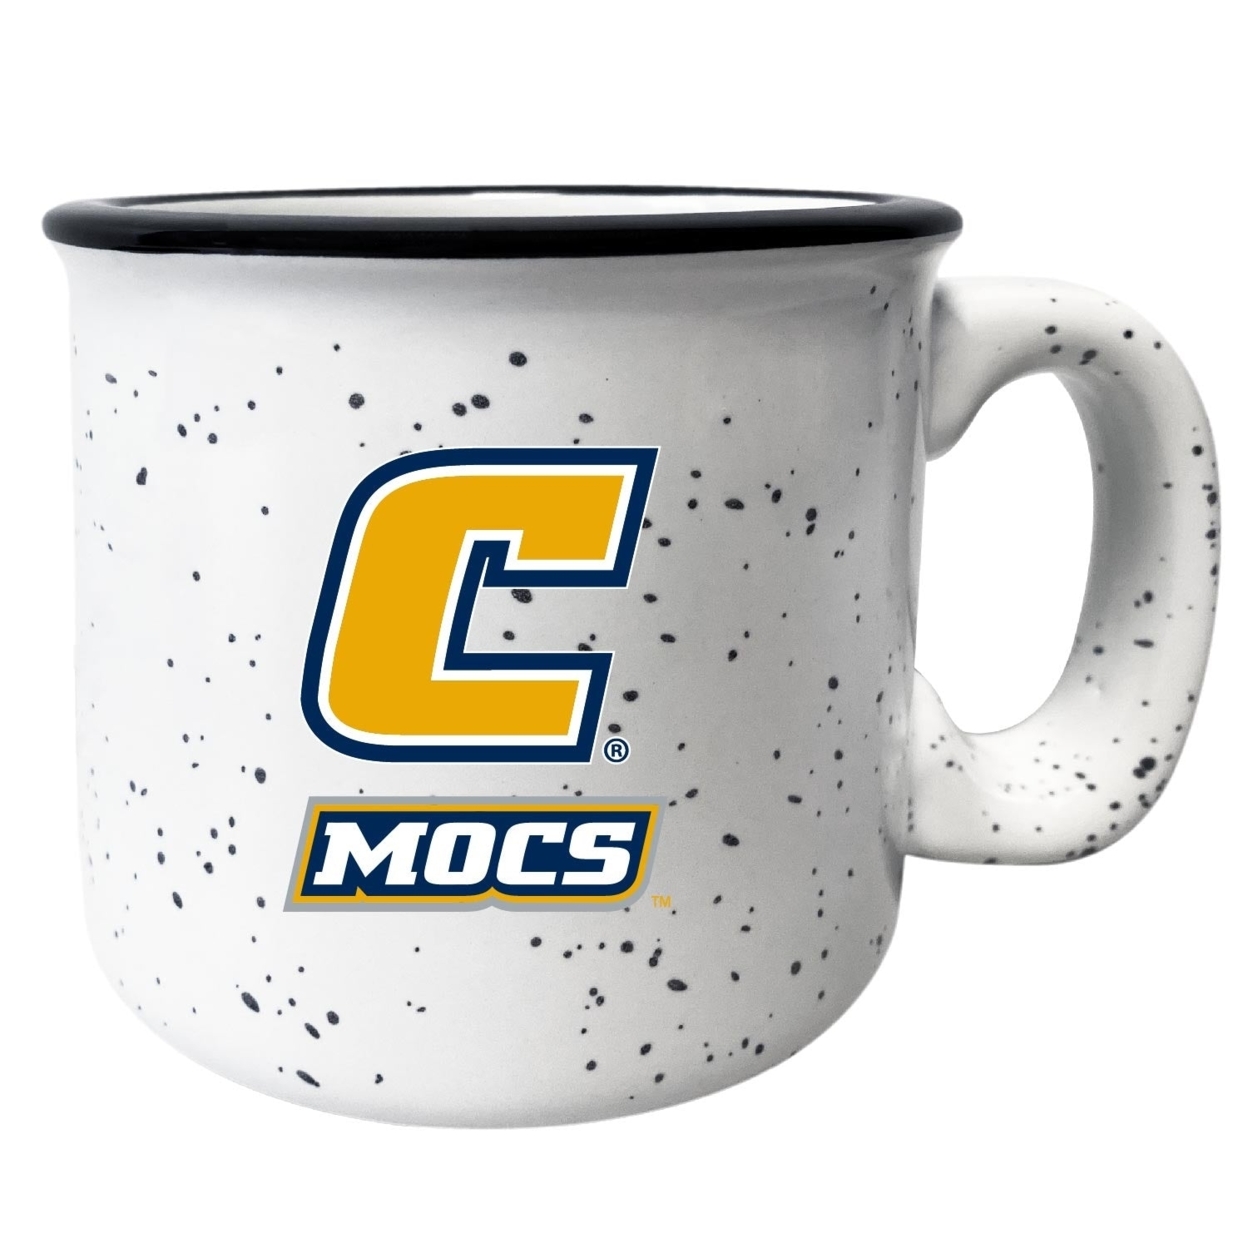 University Of Tennessee At Chattanooga Speckled Ceramic Camper Coffee Mug - Choose Your Color - White